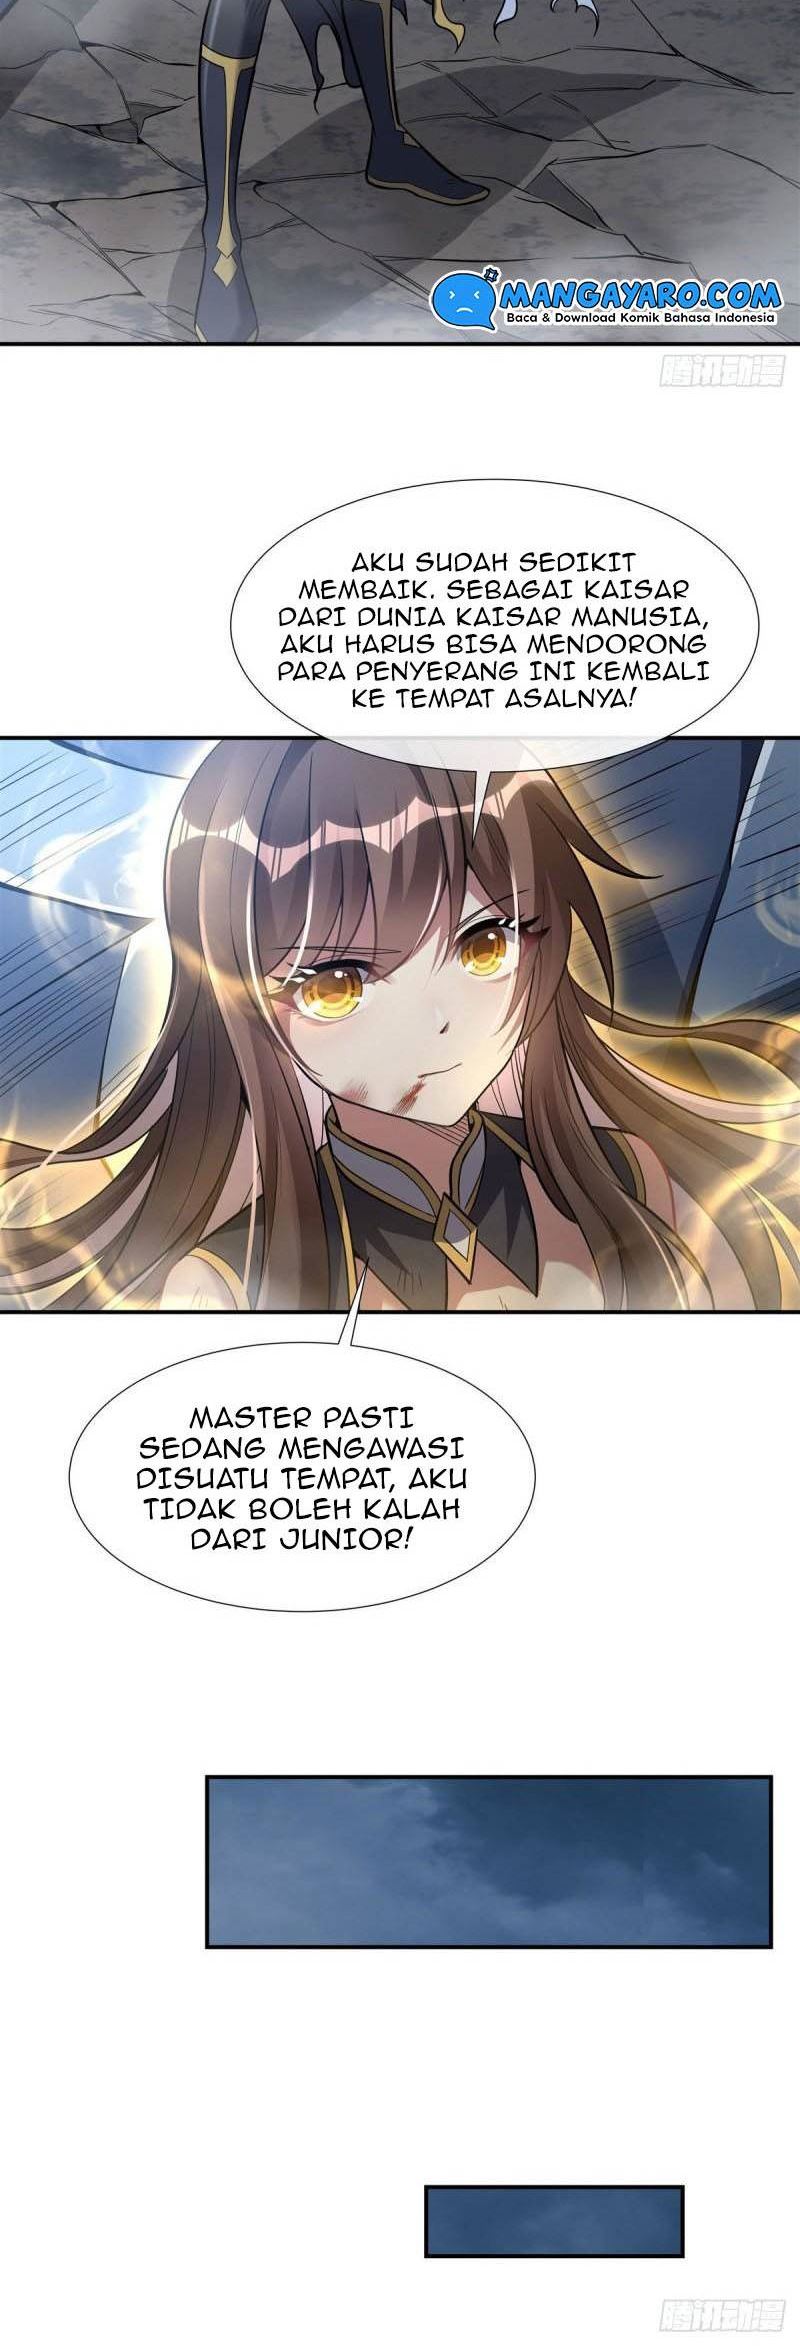 Dilarang COPAS - situs resmi www.mangacanblog.com - Komik my female apprentices are all big shots from the future 078 - chapter 78 79 Indonesia my female apprentices are all big shots from the future 078 - chapter 78 Terbaru 12|Baca Manga Komik Indonesia|Mangacan